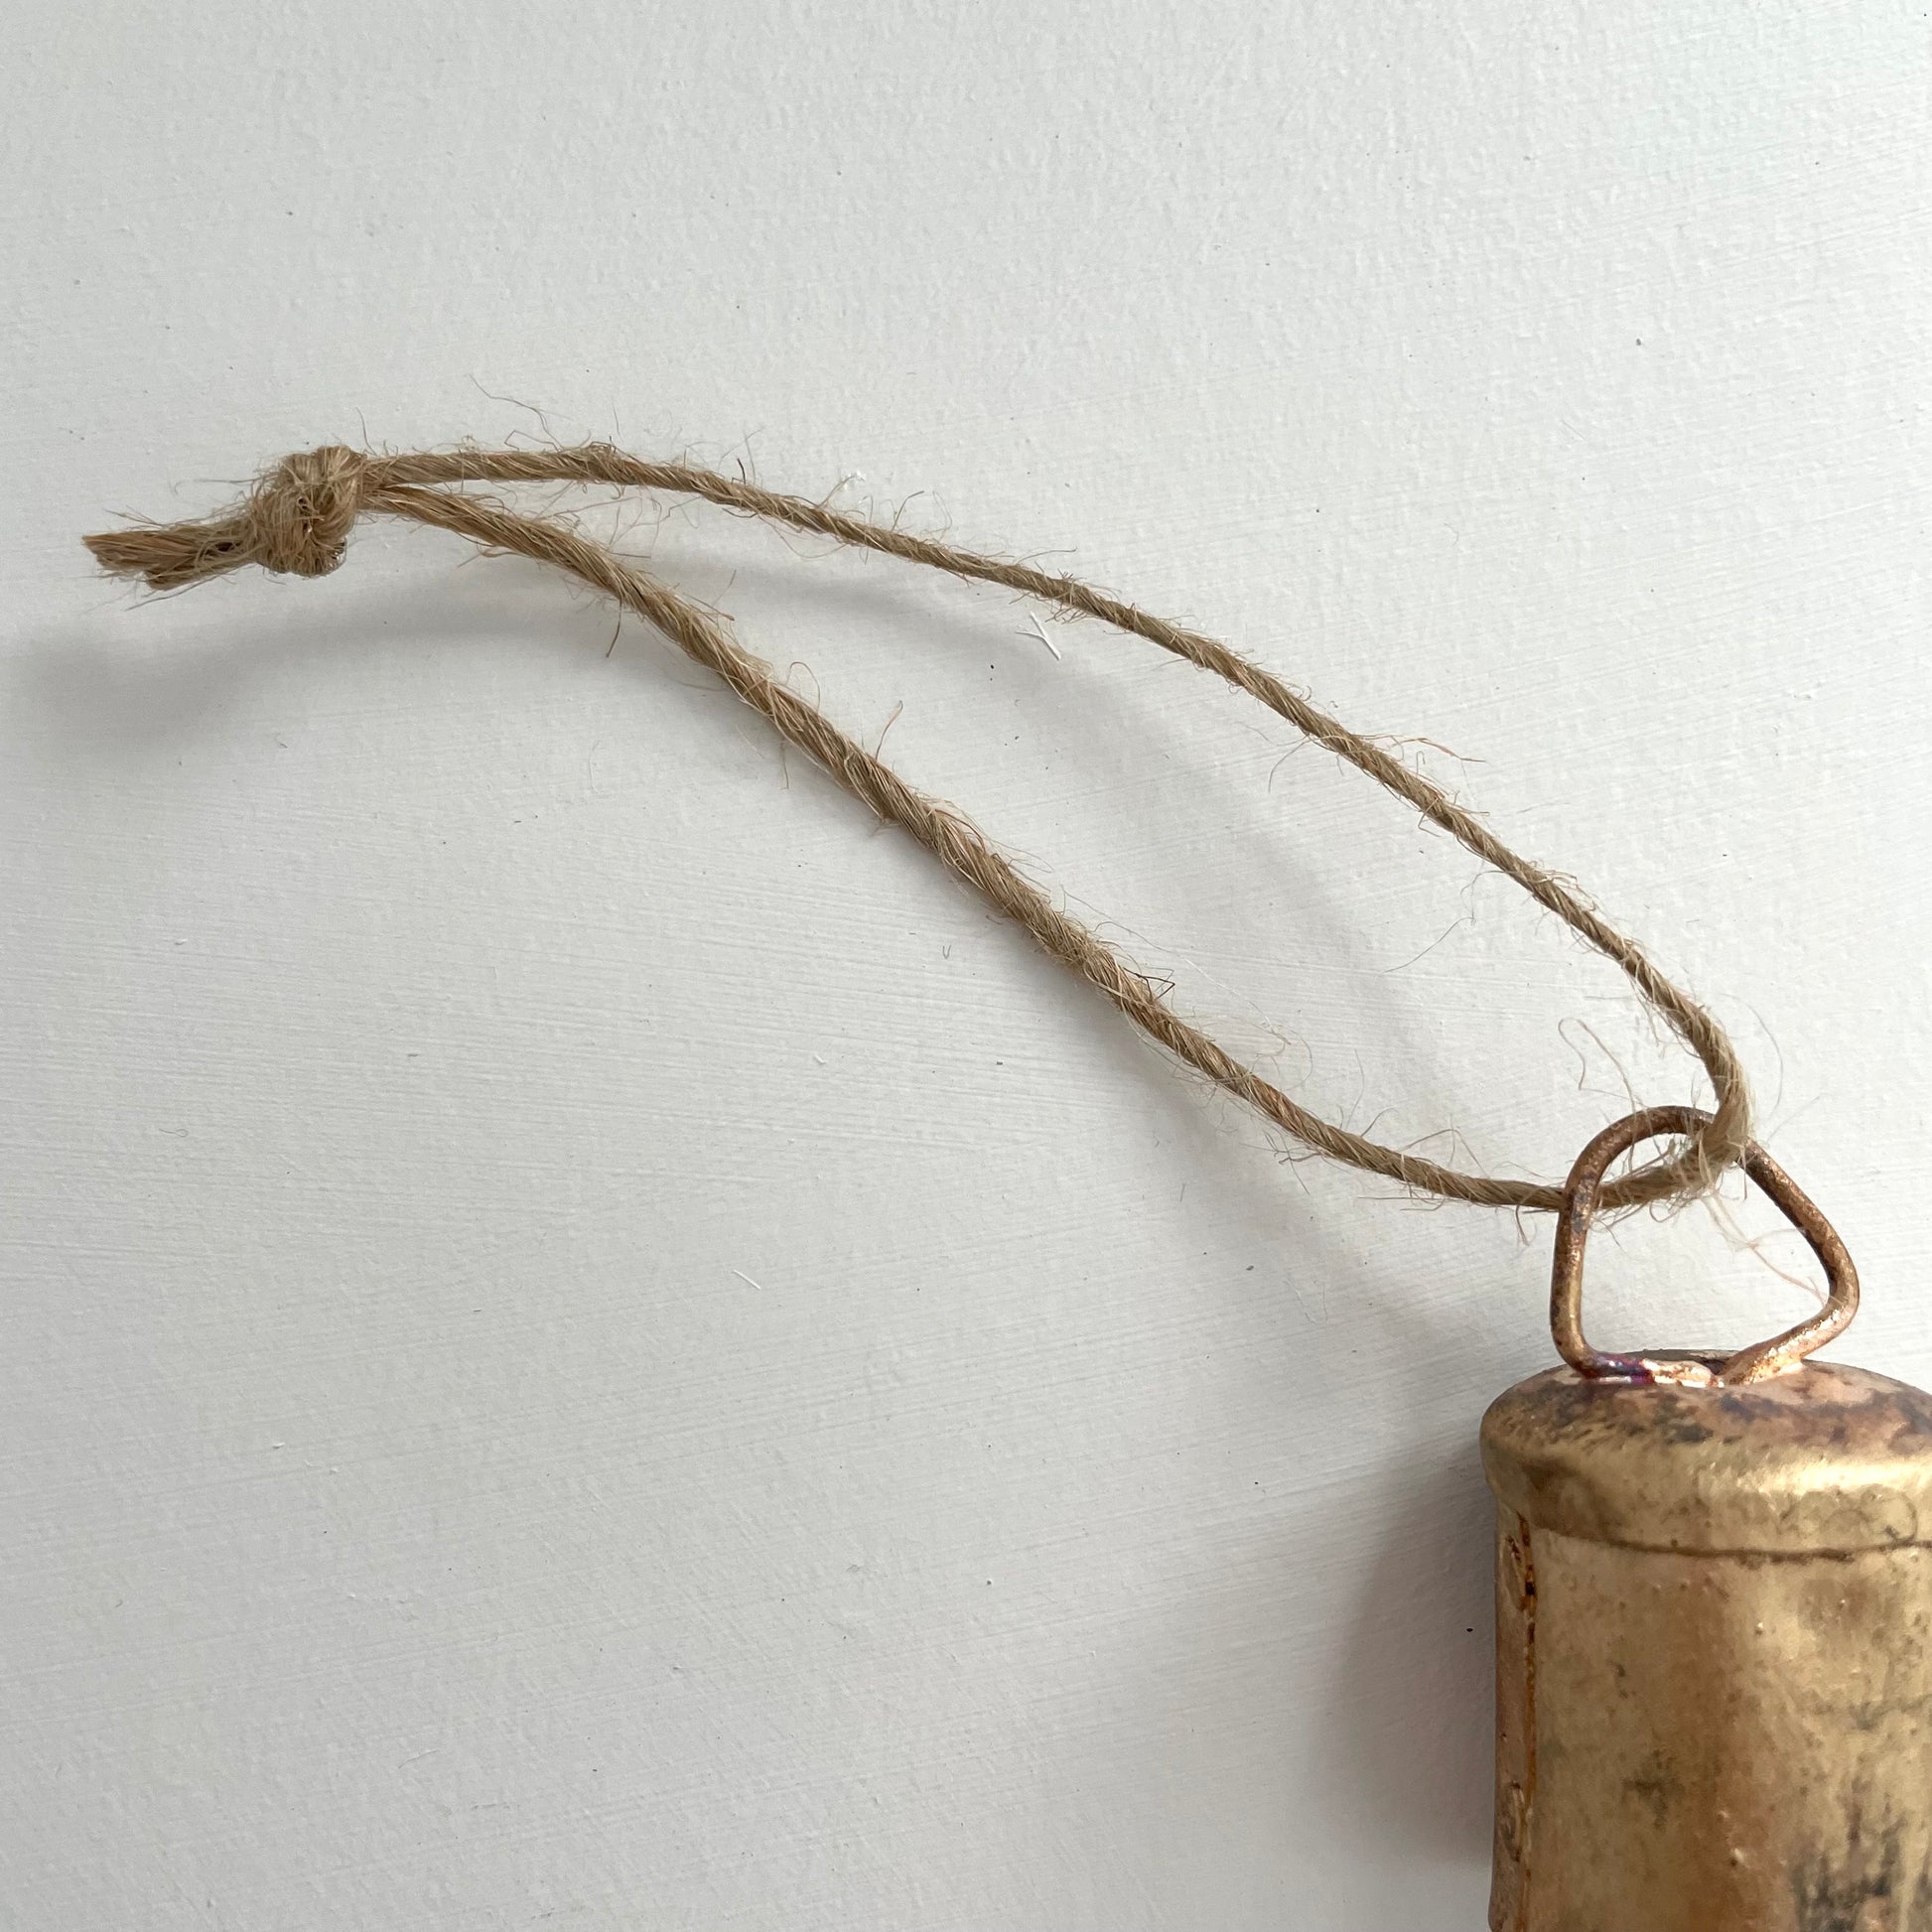 1 3/4 inch flat top tin bell with brass finish strung on twine suede and jute to make an ornament with jute cord